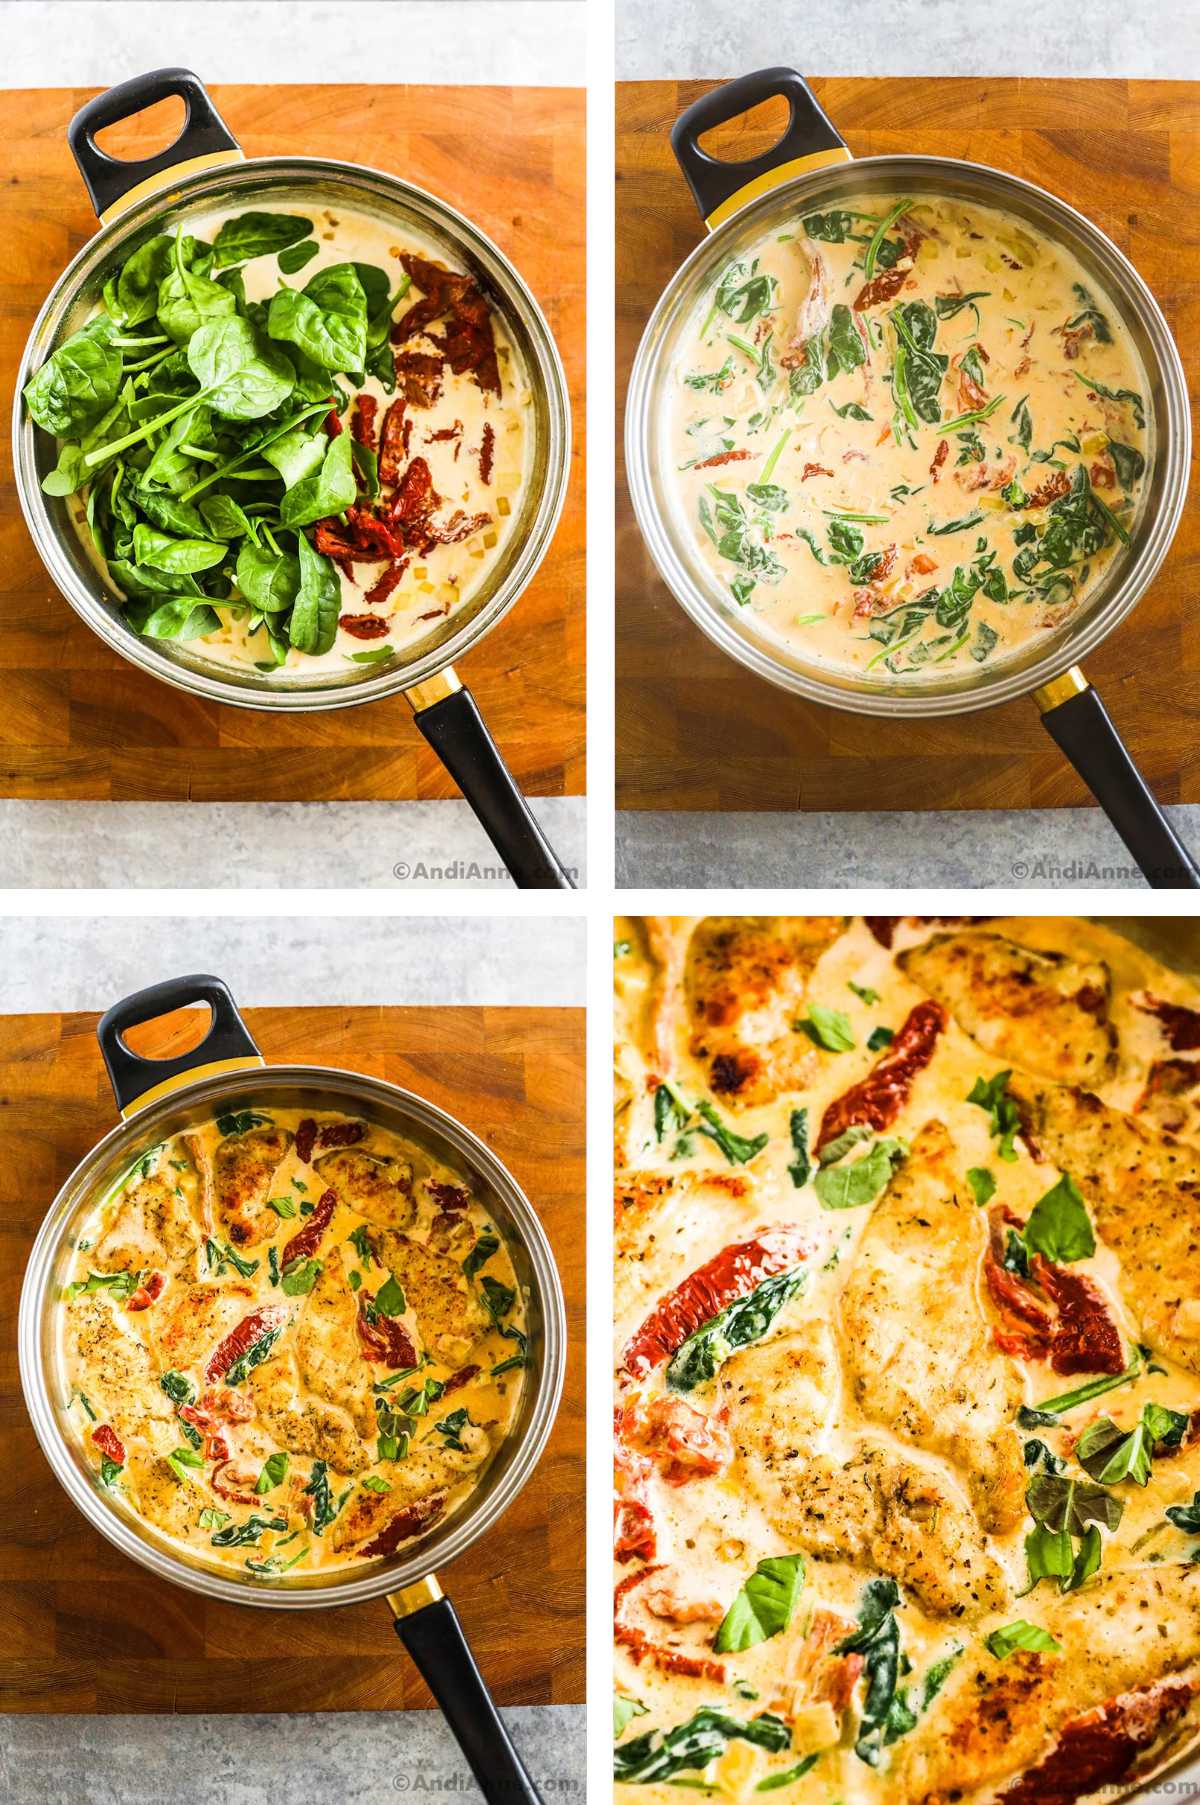 Four images in one: 1. baby spinach, and sliced sun-dried tomatoes are added to the pan. 2. Seared Chicken is added to the mixture. 3. Pan is removed from heat, placed on wooden cutting board, basil, salt and pepper are stirred in. 4. Closeup of the finished recipe. Chicken, sun-dried tomatoes, spinach, pepper and fresh basil. 